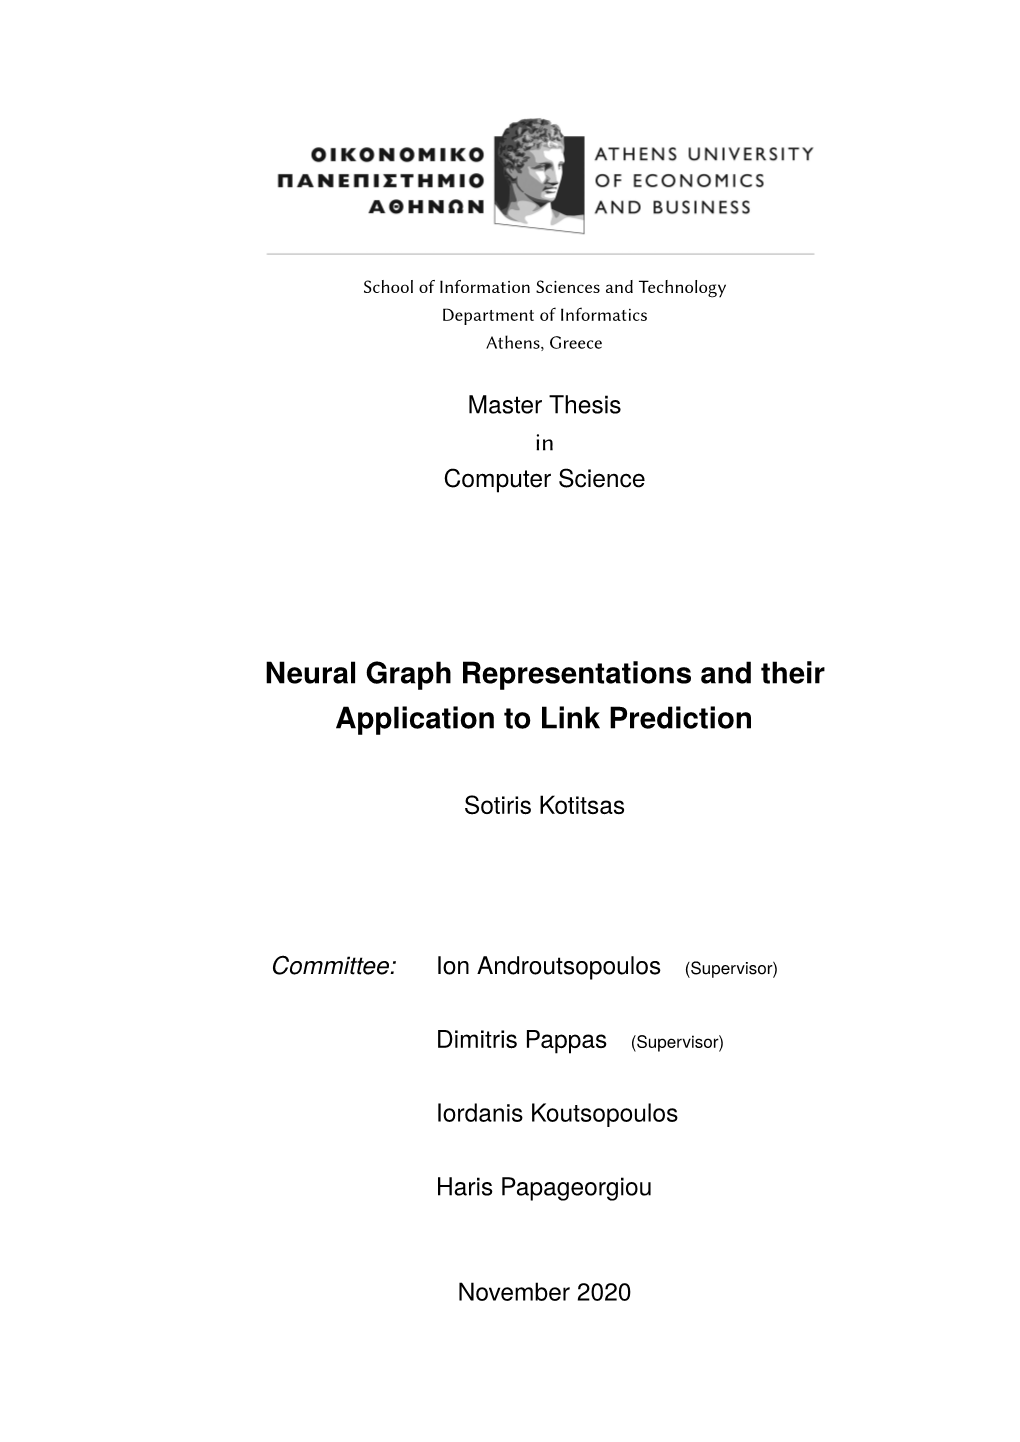 Neural Graph Representations and Their Application to Link Prediction